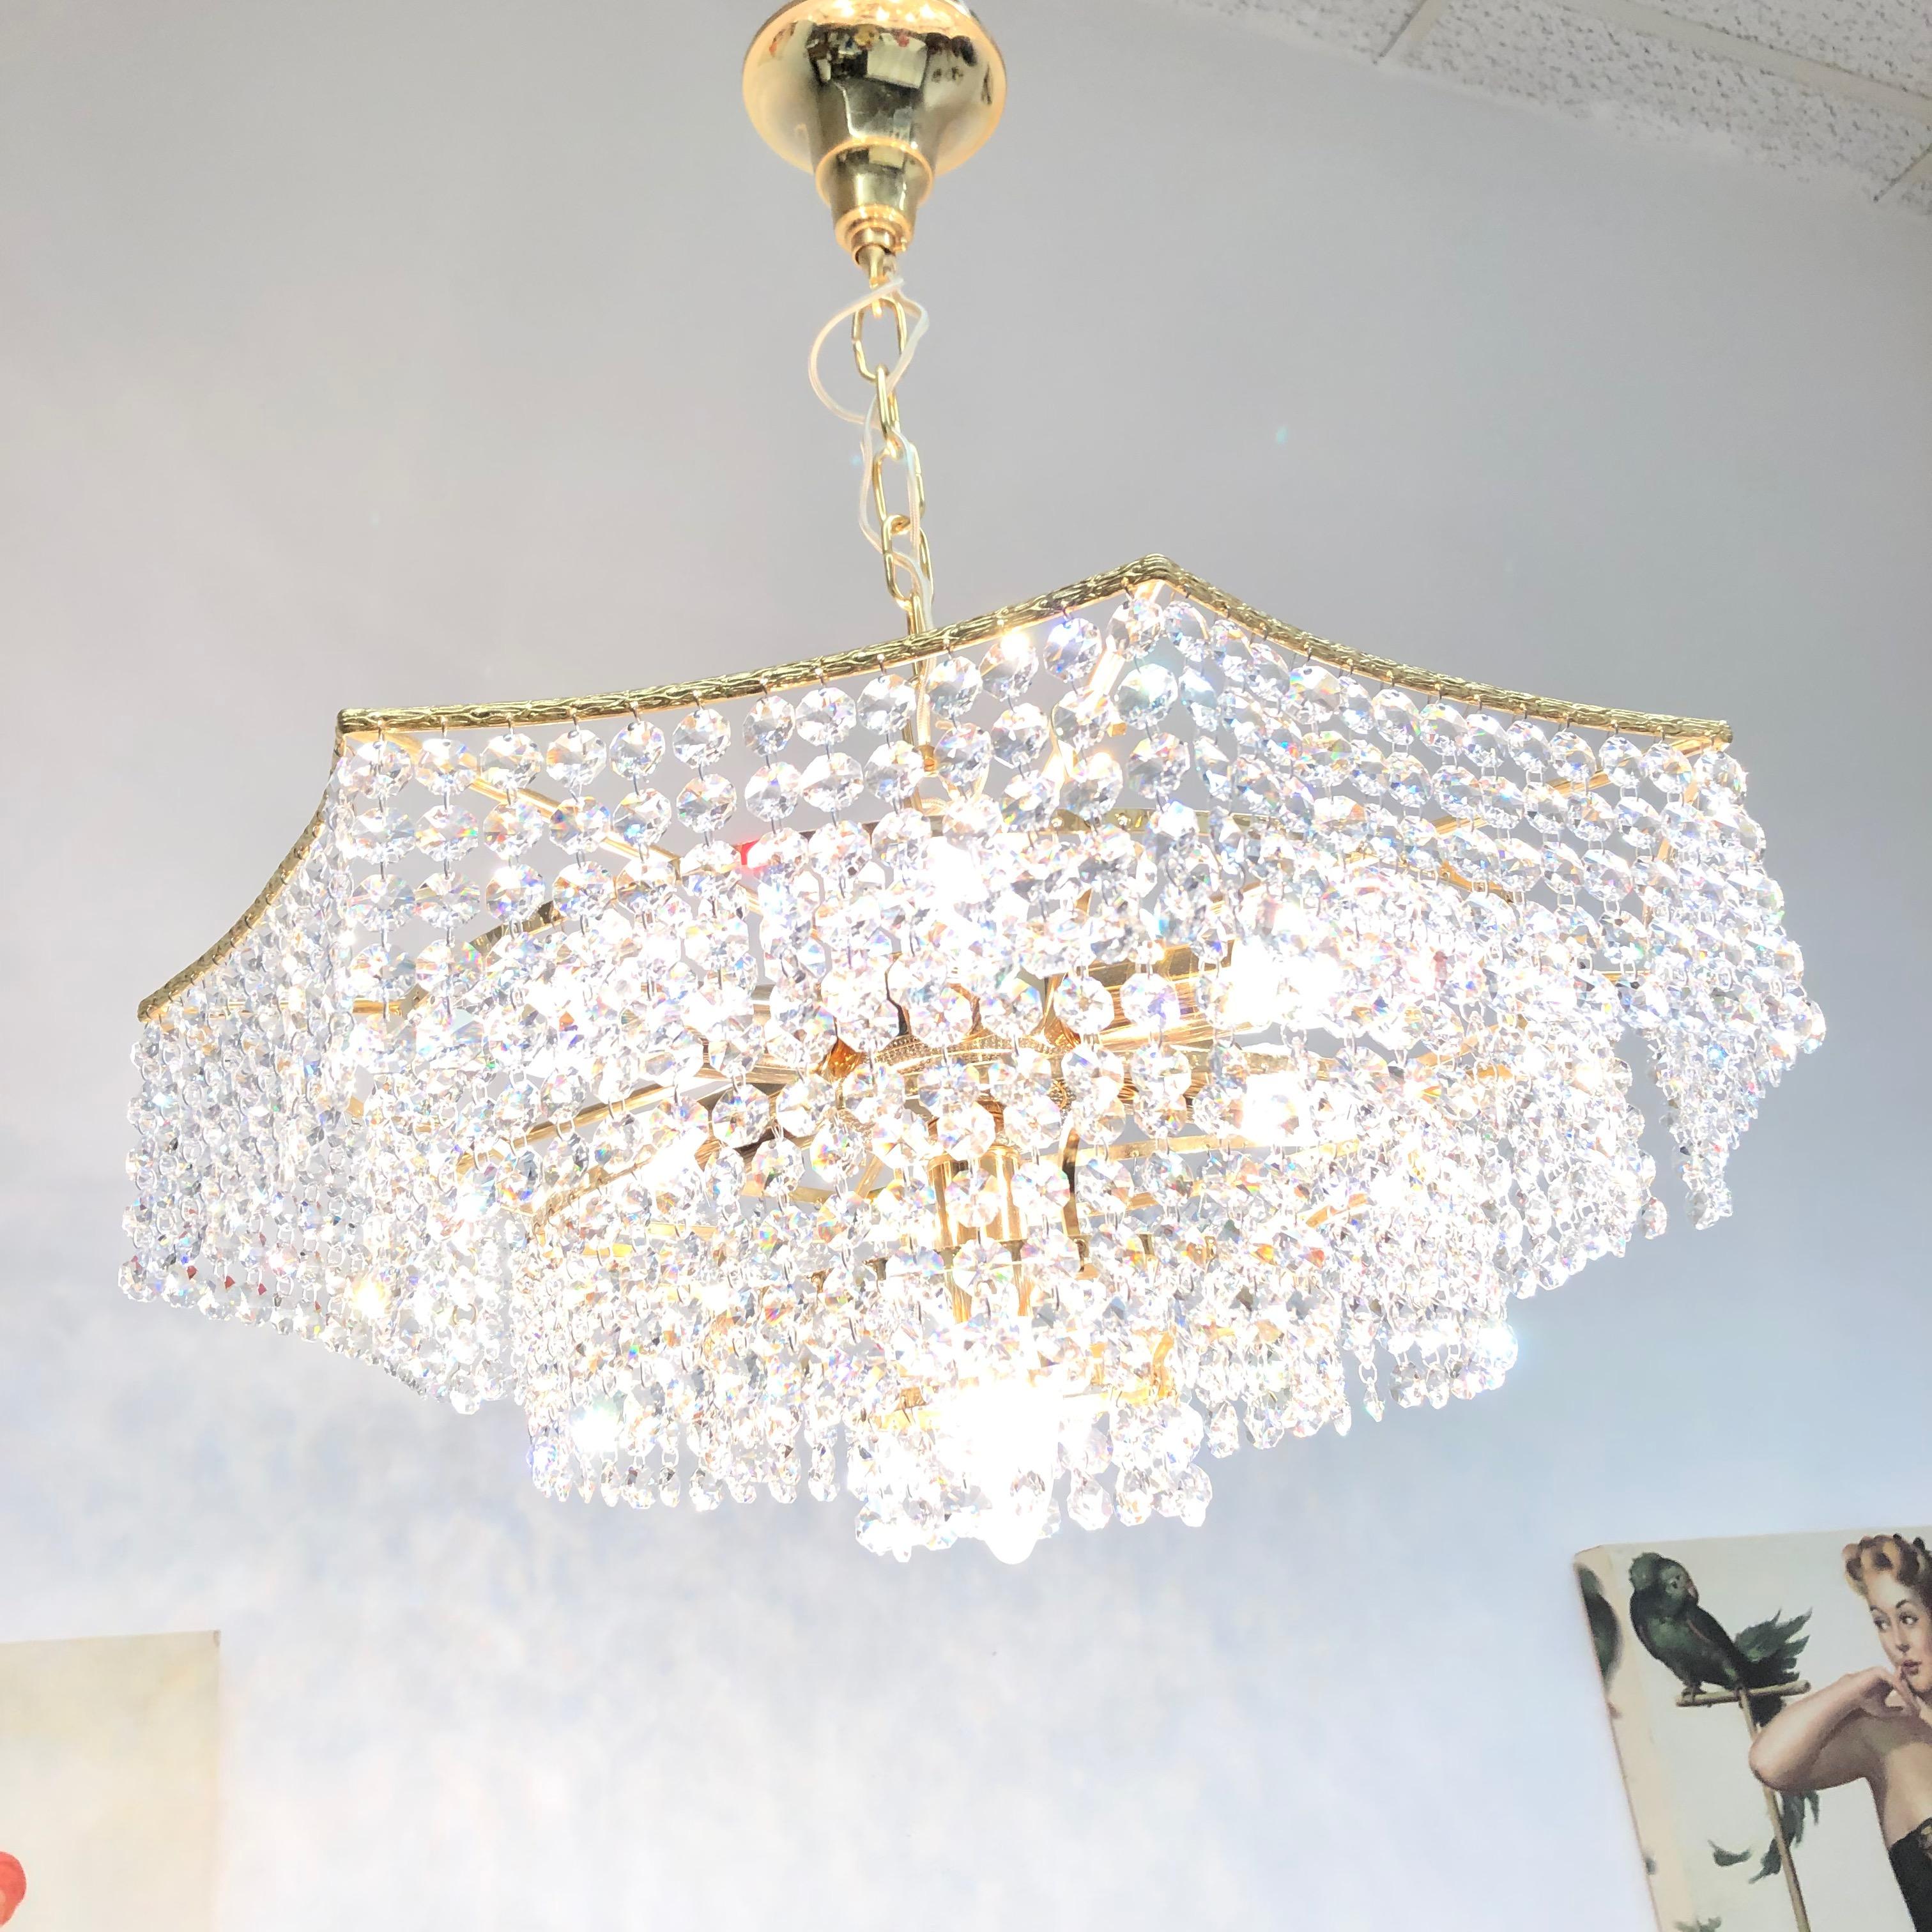 Brass and Crystal Glass Waterfall Chandelier, Richard Essig, Germany, 1960s For Sale 11